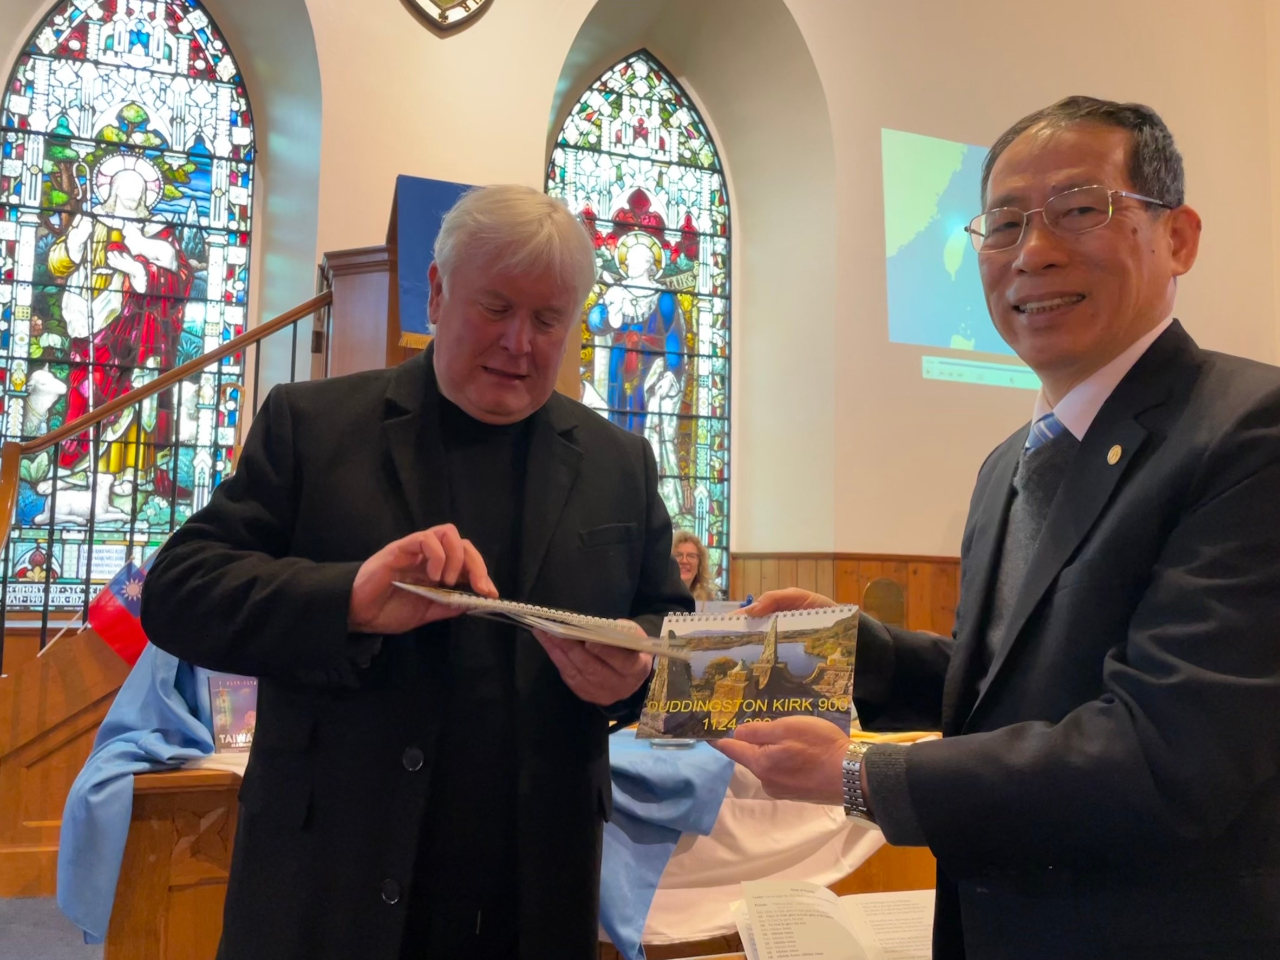 DG Chang attended the WORLD DAY OF PRAYER FOR TAIWAN at Duddingston Kirk, Church of Scotland on Friday, 3rd March 2023.